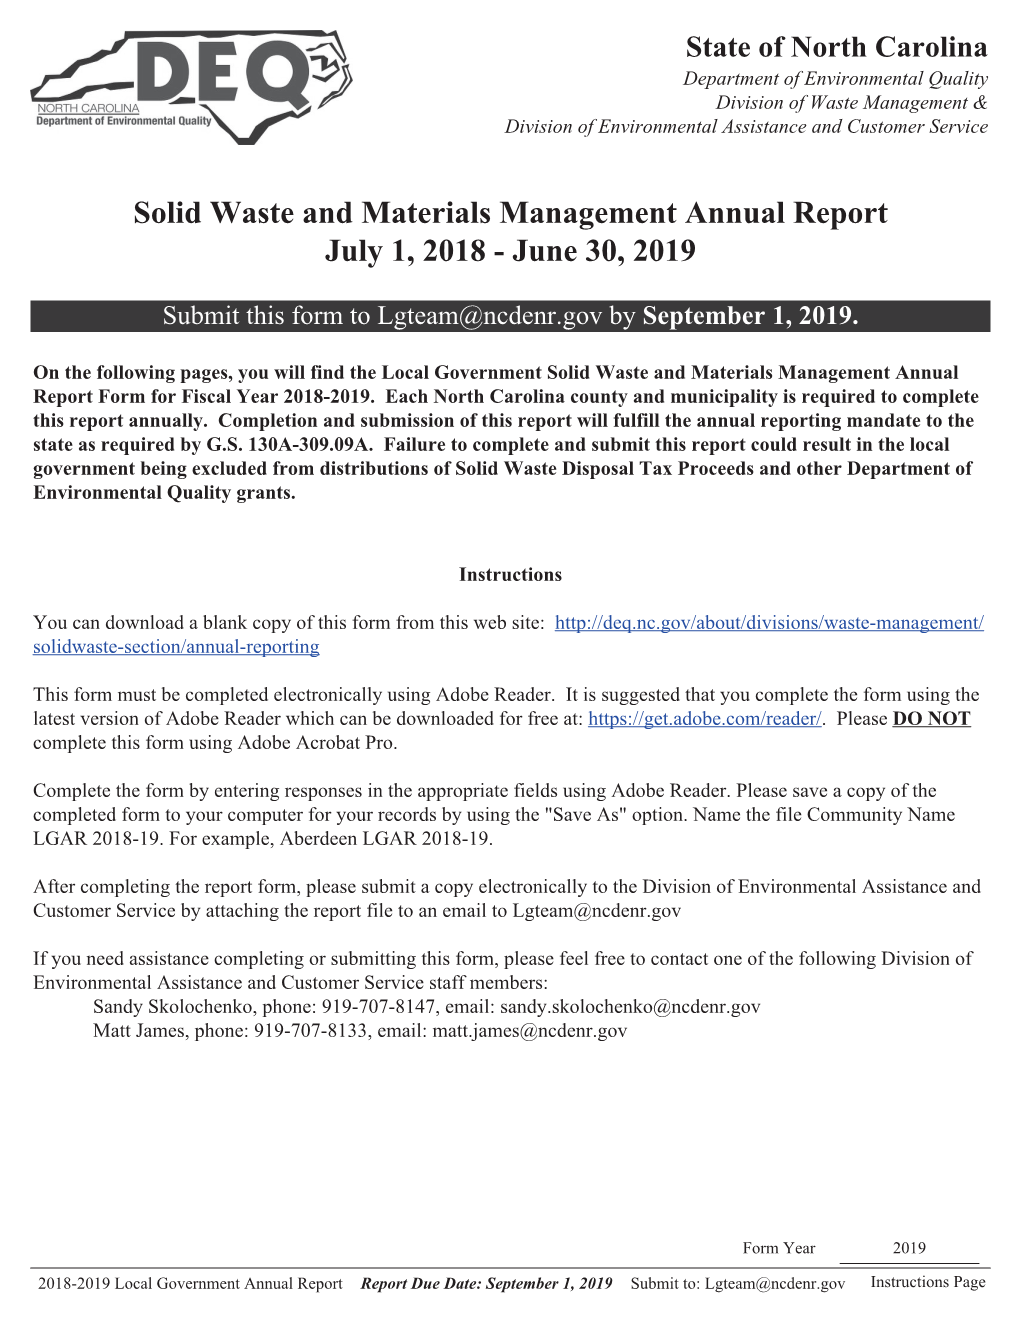 Solid Waste and Materials Management Annual Report July 1, 2018 - June 30, 2019